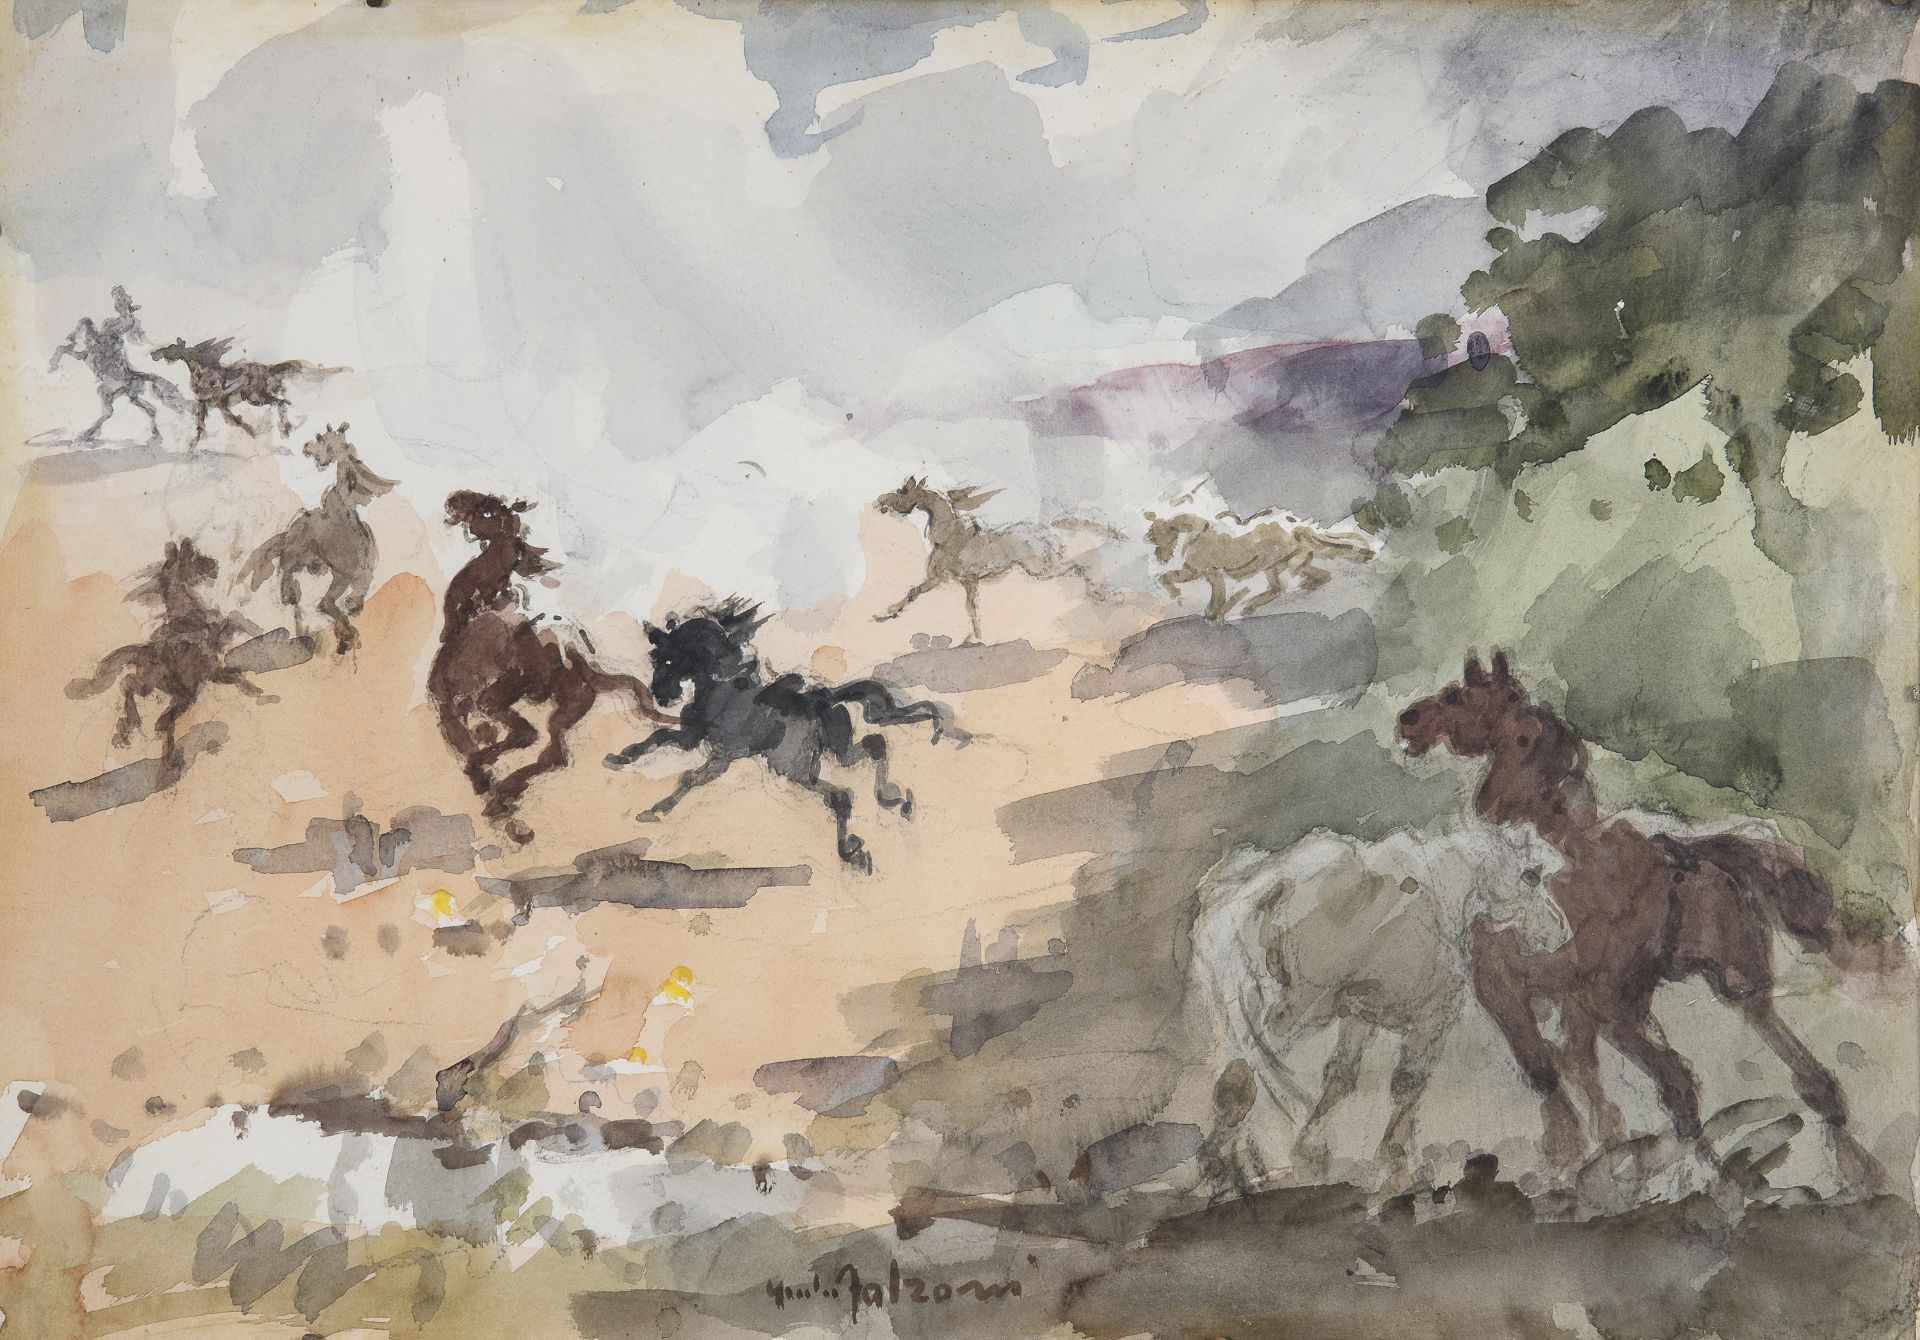 WATERCOLOR OF HORSES BY GIULIO FALZONI 1968